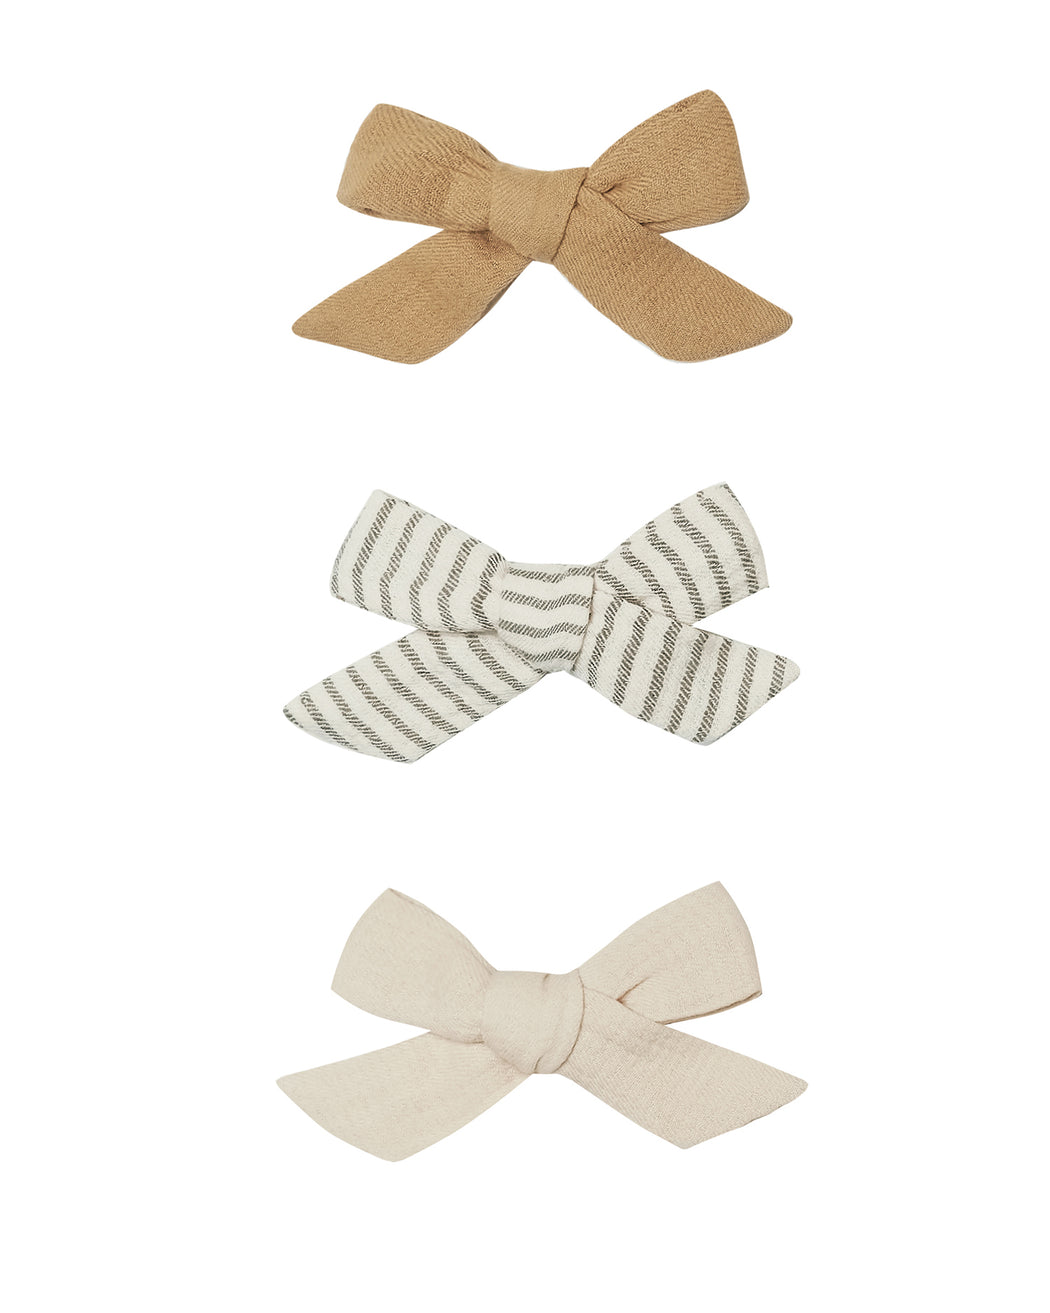 Bow W. Clip Set – Assorted Sets of 3